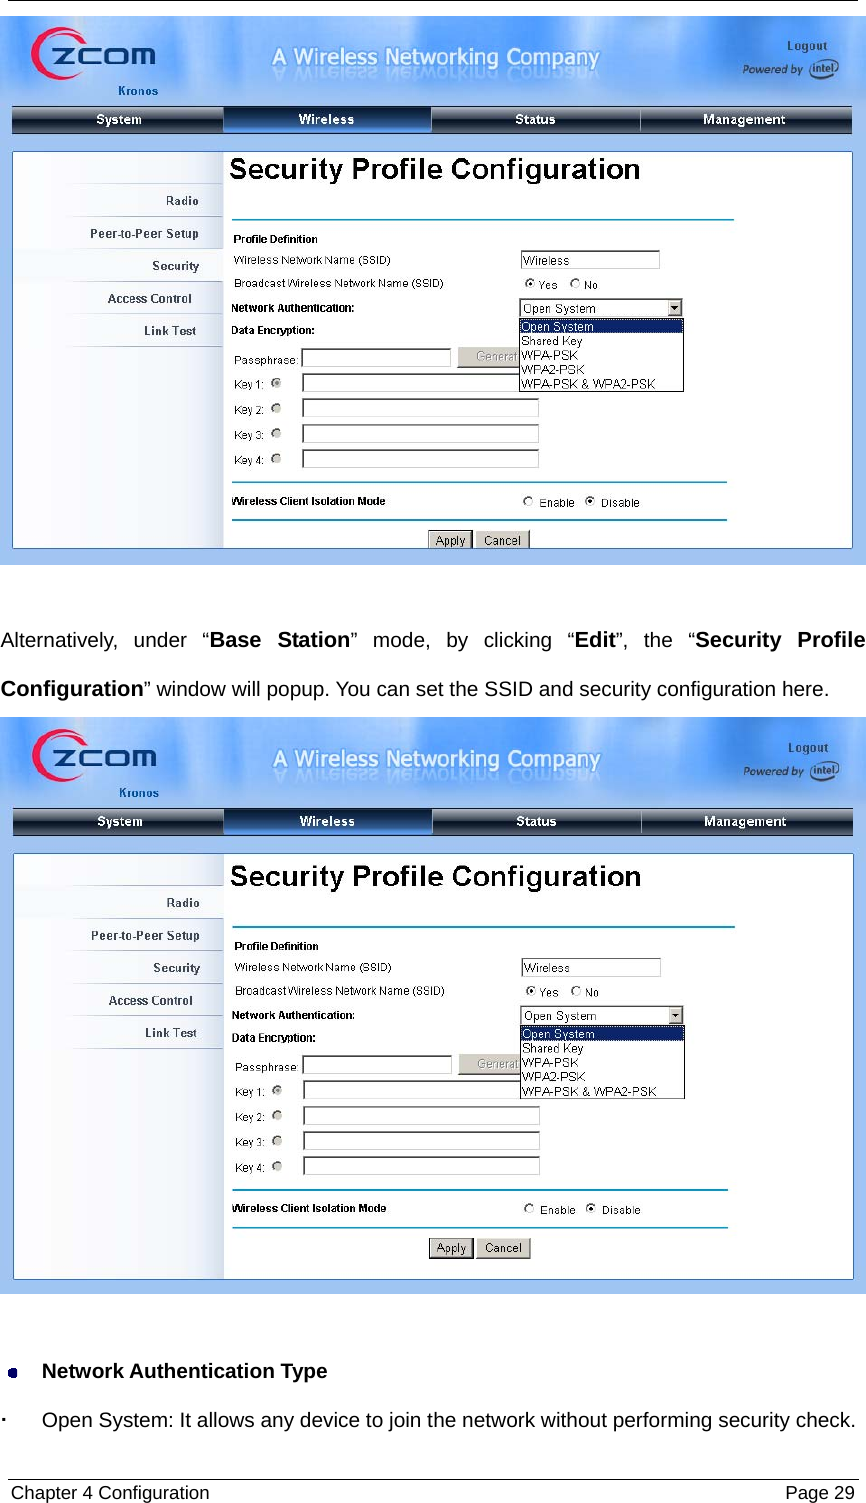  Chapter 4 Configuration  Page 29  Alternatively, under “Base Station” mode, by clicking “Edit”, the “Security Profile Configuration” window will popup. You can set the SSID and security configuration here.    Network Authentication Type   Open System: It allows any device to join the network without performing security check. 